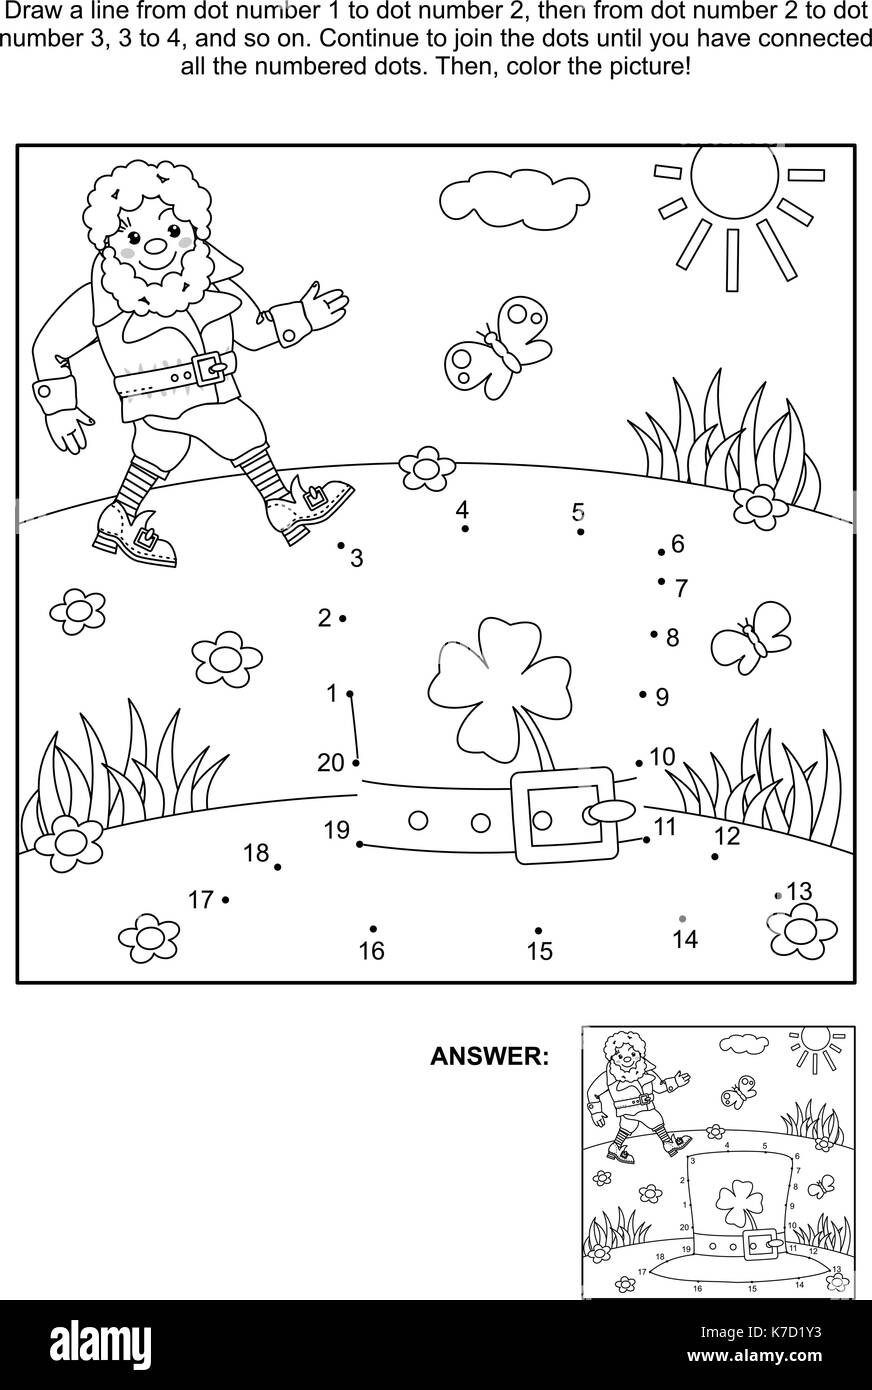 Where is my hat? St. Patrick's Day themed connect the dots picture puzzle and coloring page with leprechaun and his hat. Answer included. Stock Vector